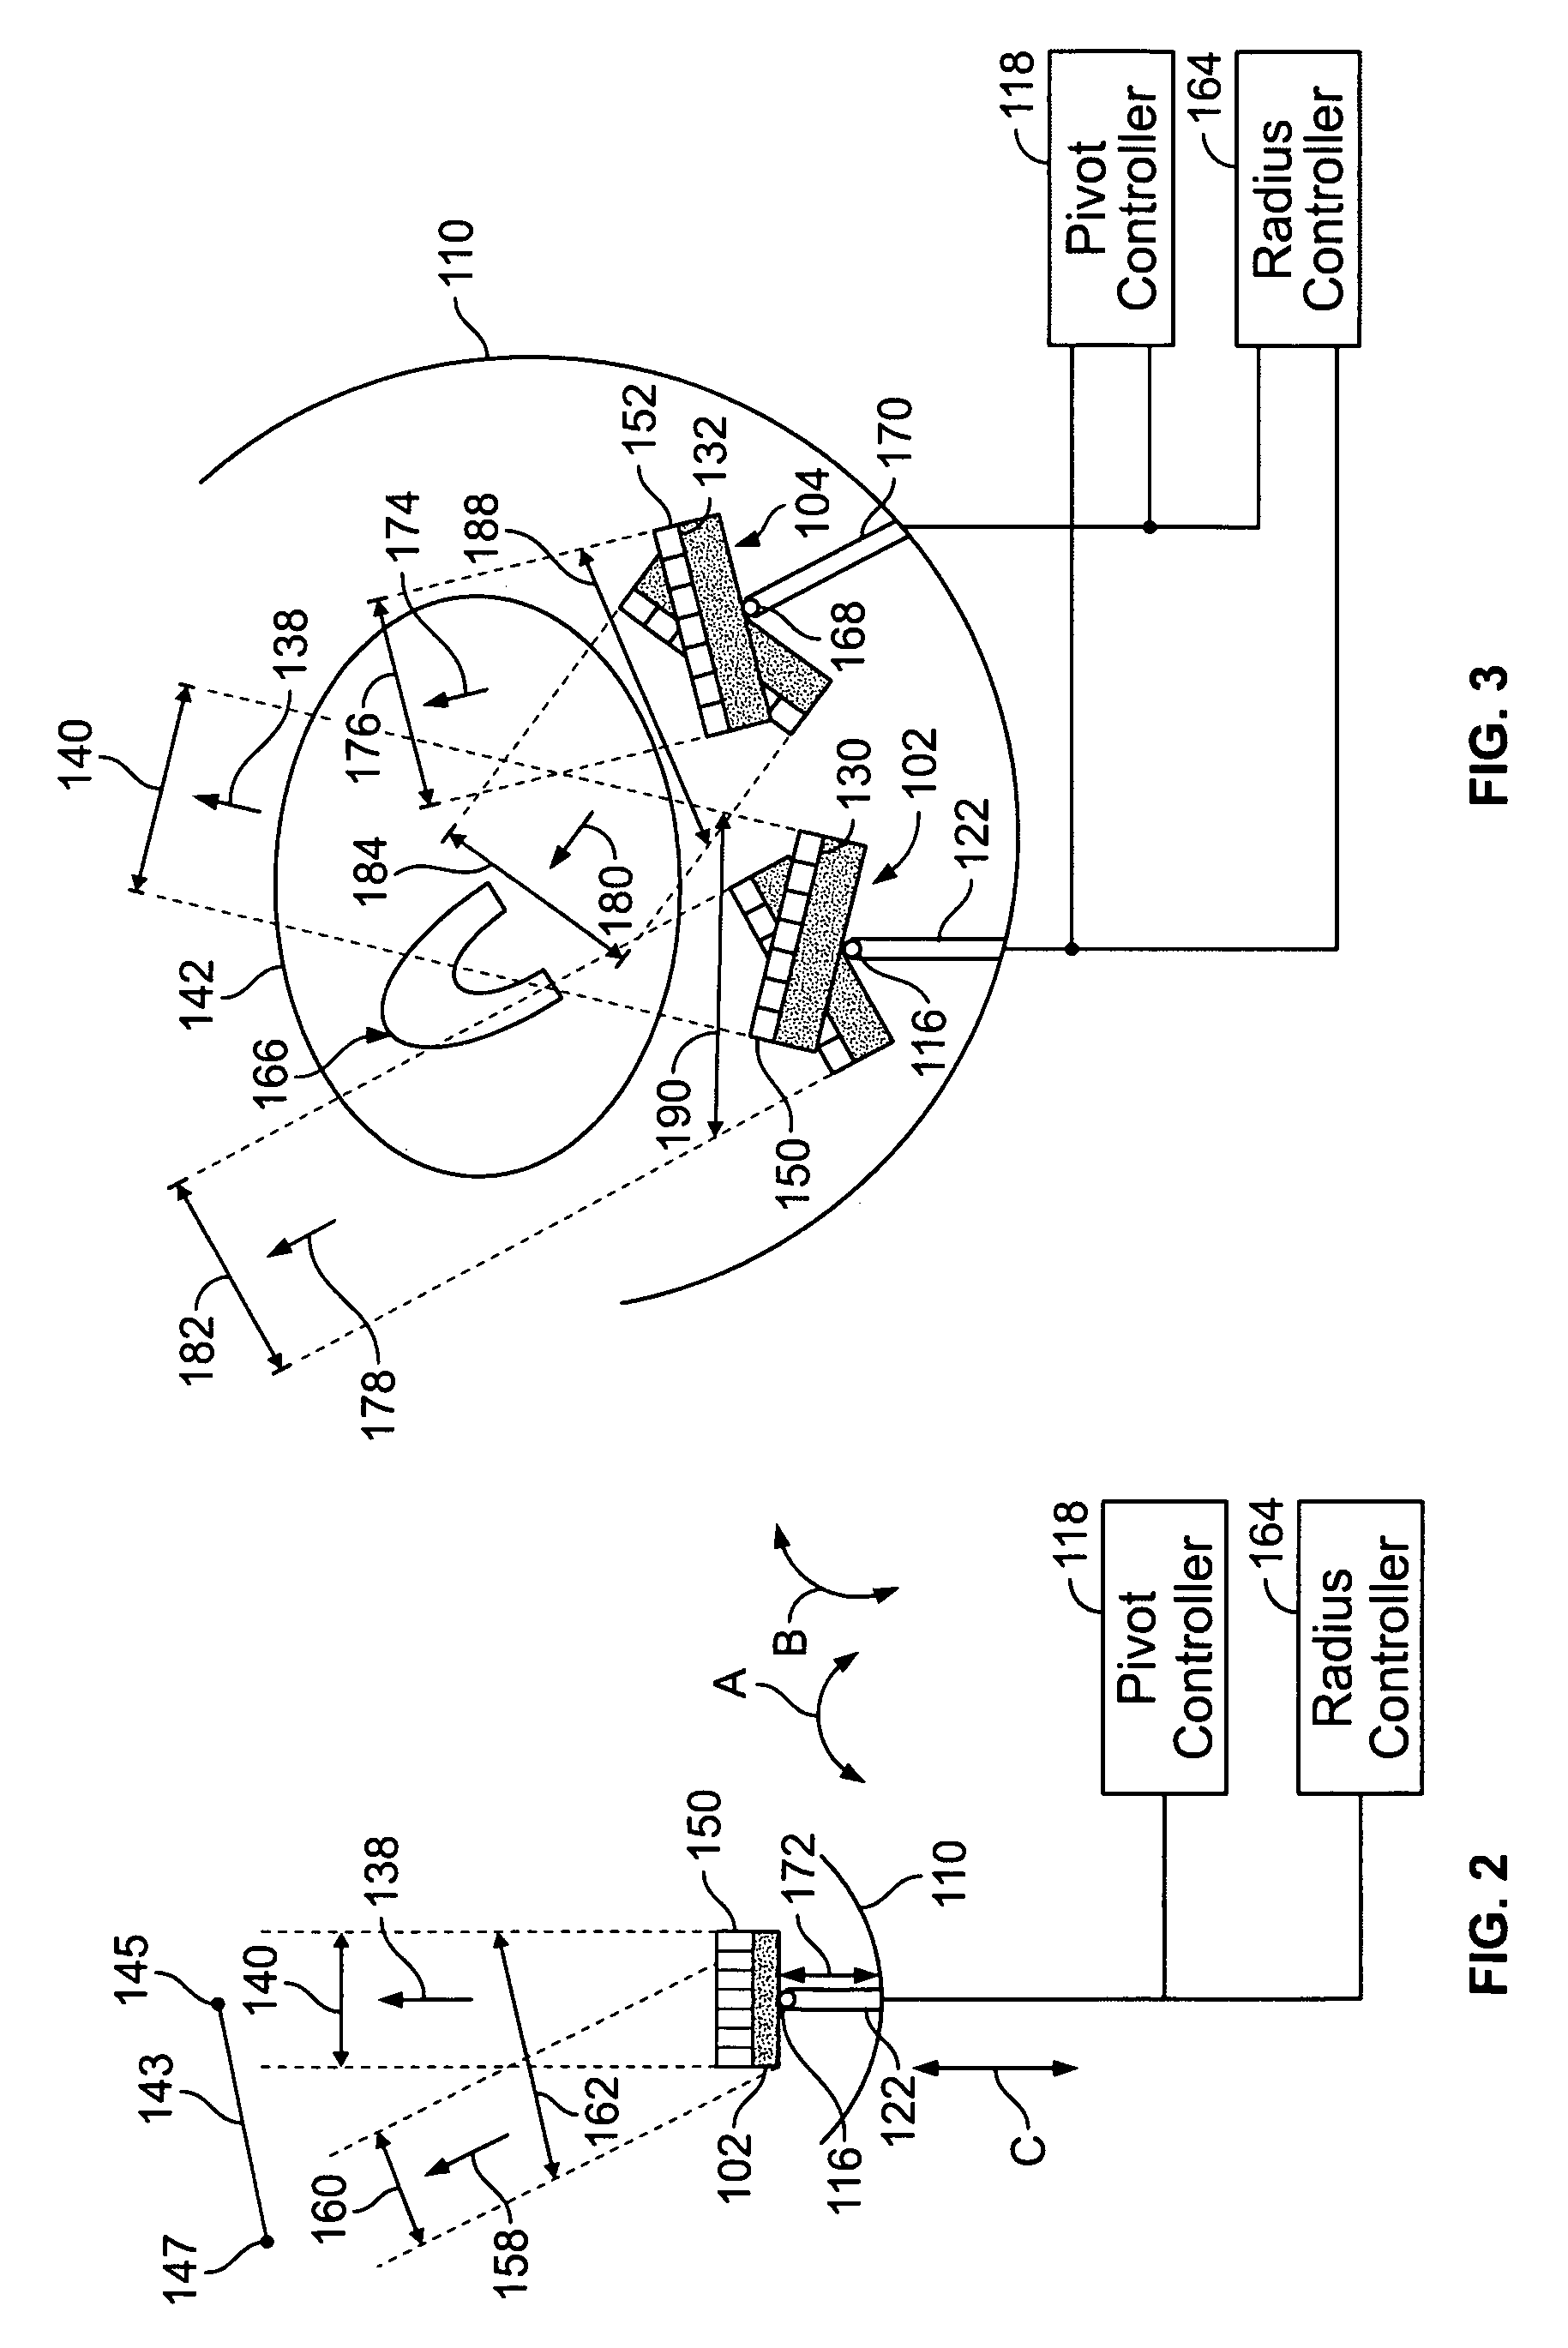 Method and apparatus for imaging with imaging detectors having small fields of view